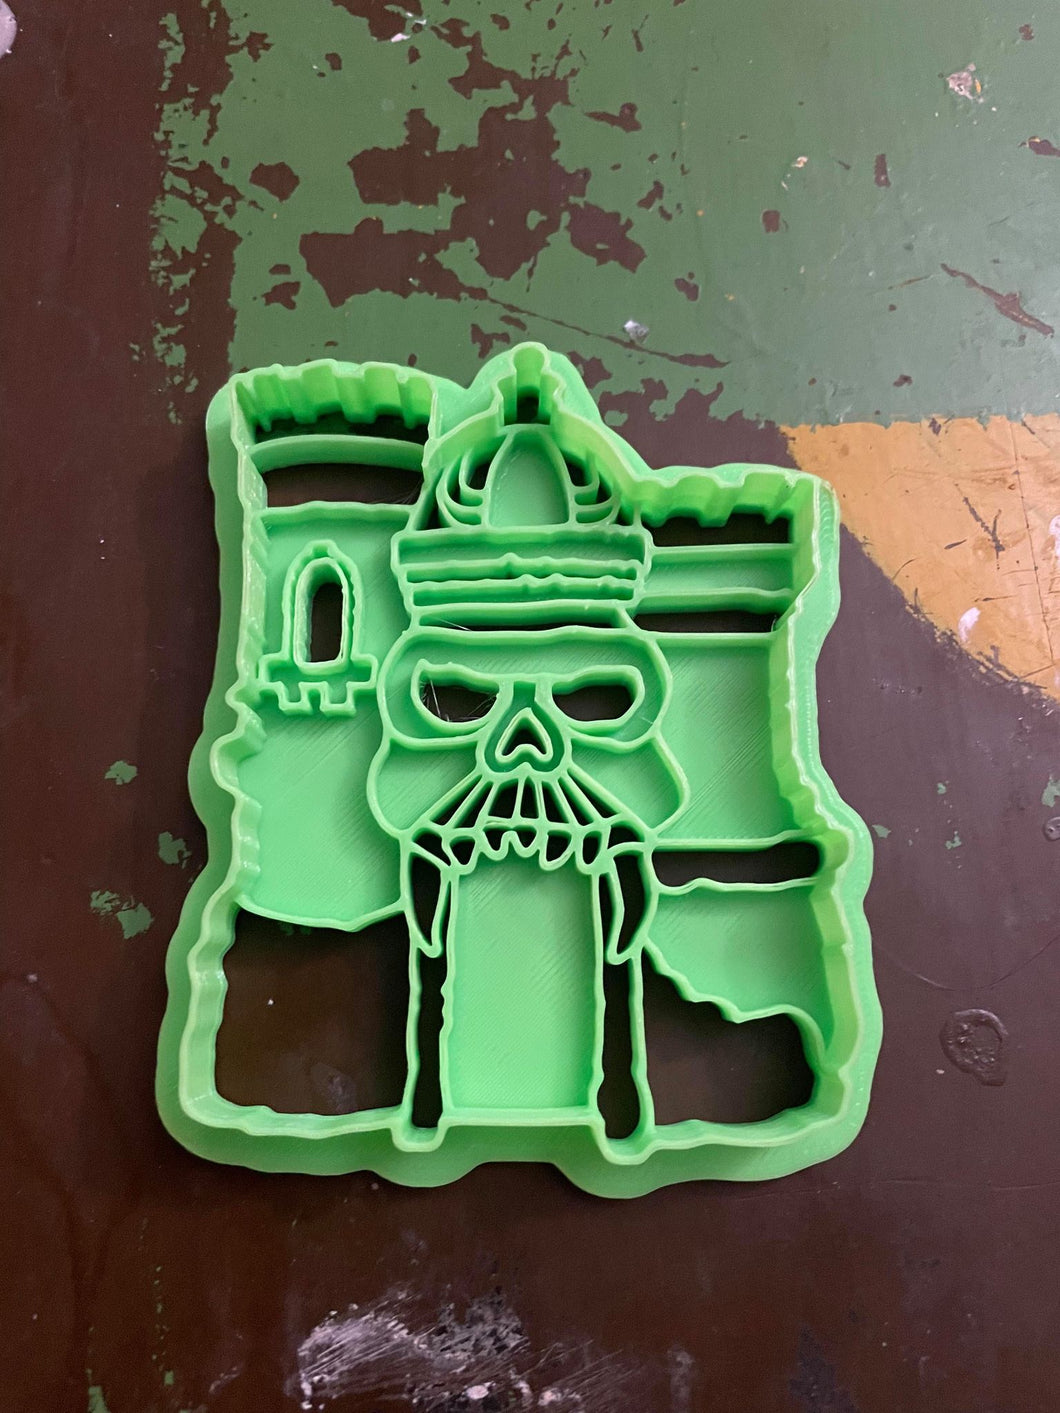 3D Printed Cookie Cutter Inspired by Masters of the Universe Castle Greyskull